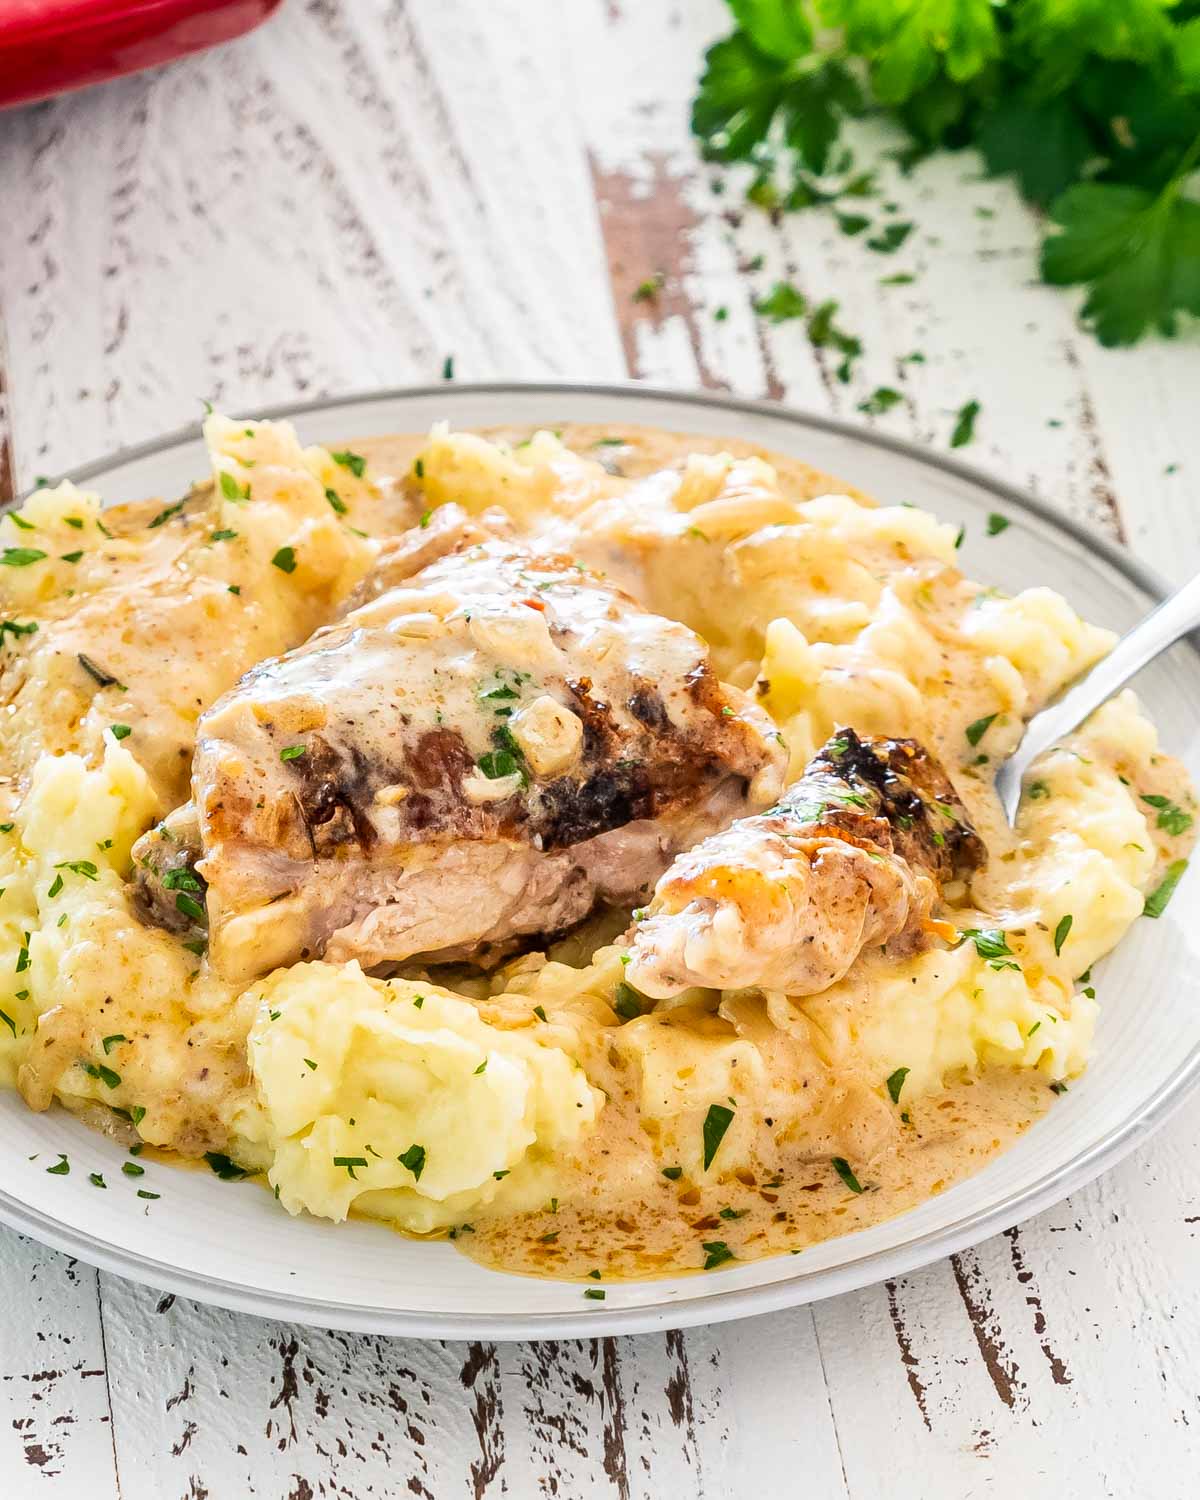 a chicken thigh with gravy over a bed of mashed potatoes.